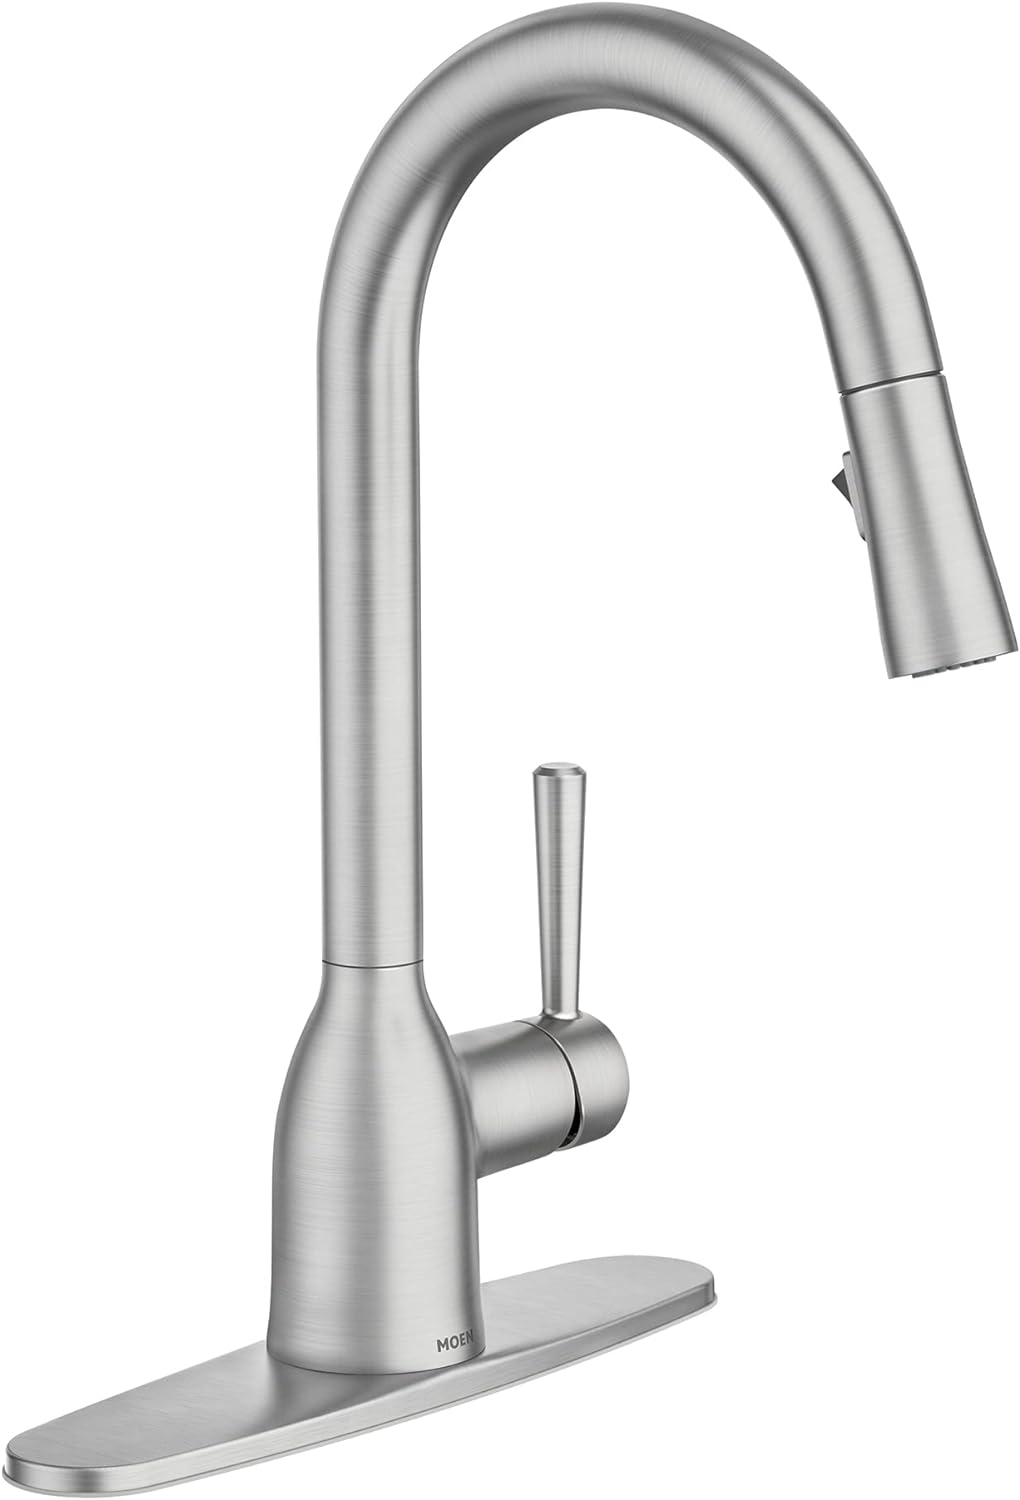 This is a great faucet. I bought to replace a leaky kitchen faucet. It was easy to install and it looks great and has a very powerful sprayer.